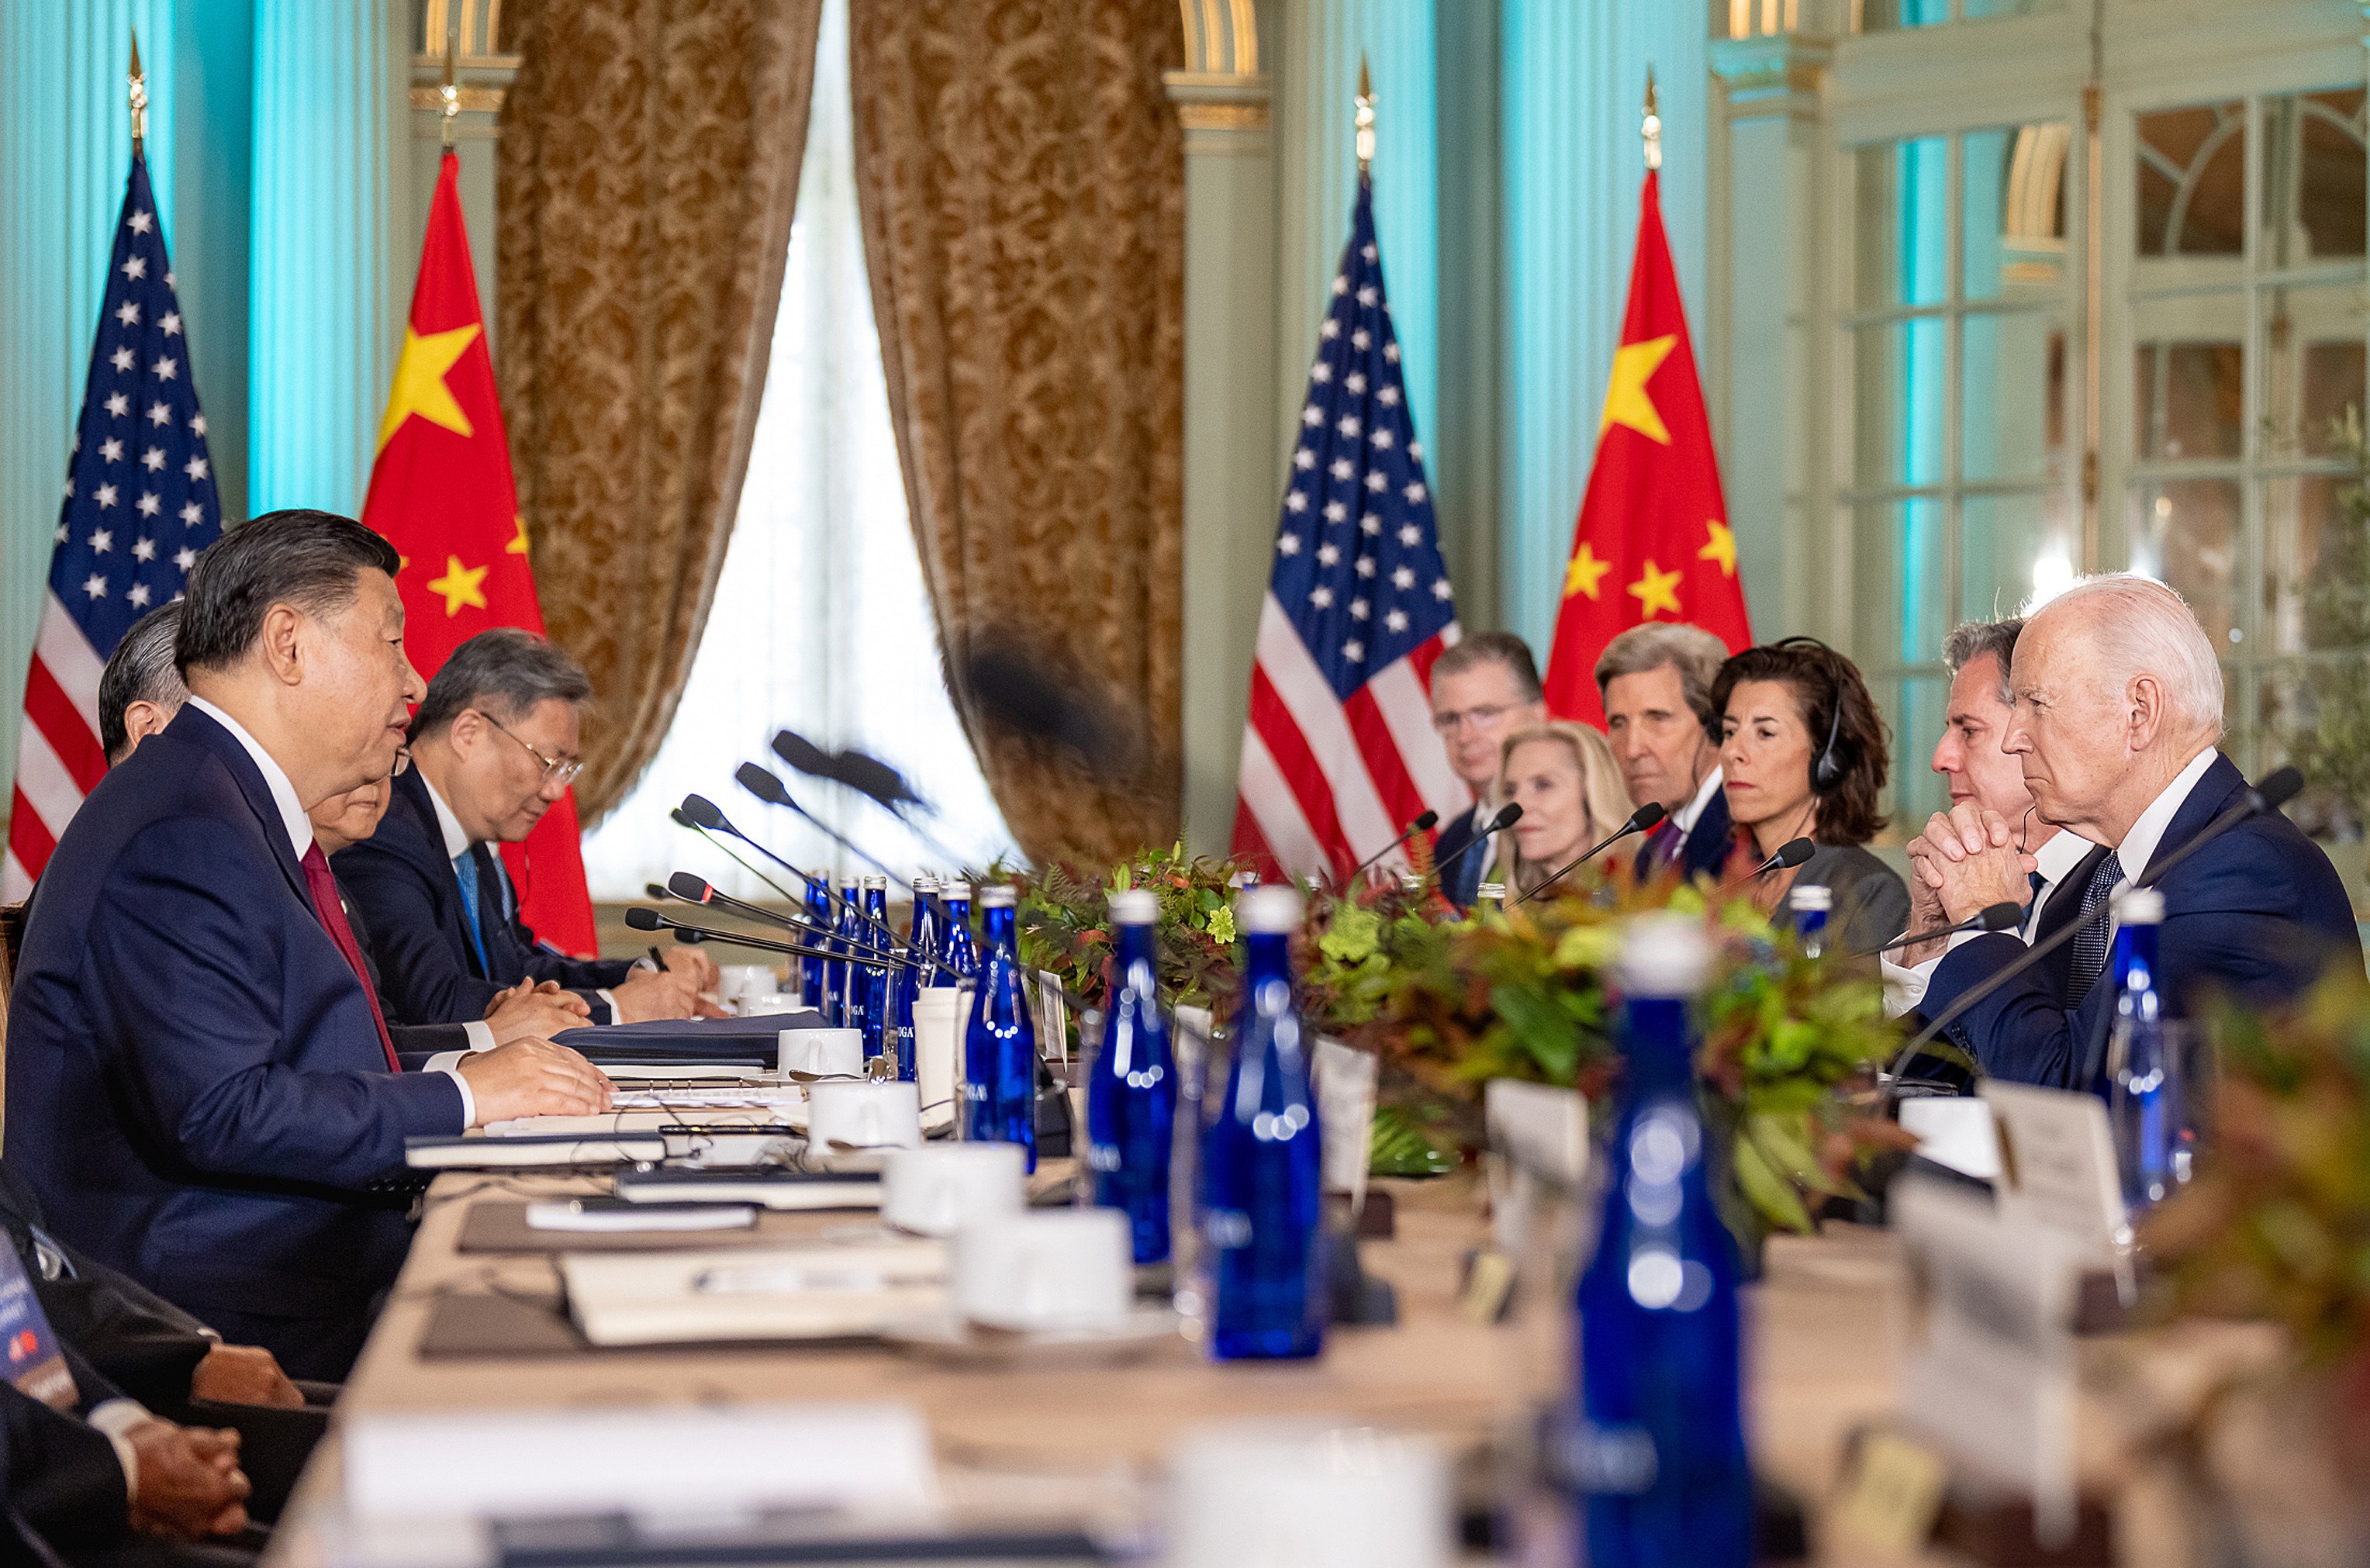 The Joe Biden administration holds talks with Chinese President Xi Jinping and senior officials at the Filoli estate south of San Francisco on November 15, ahead of the Apec forum. Photo: dpa